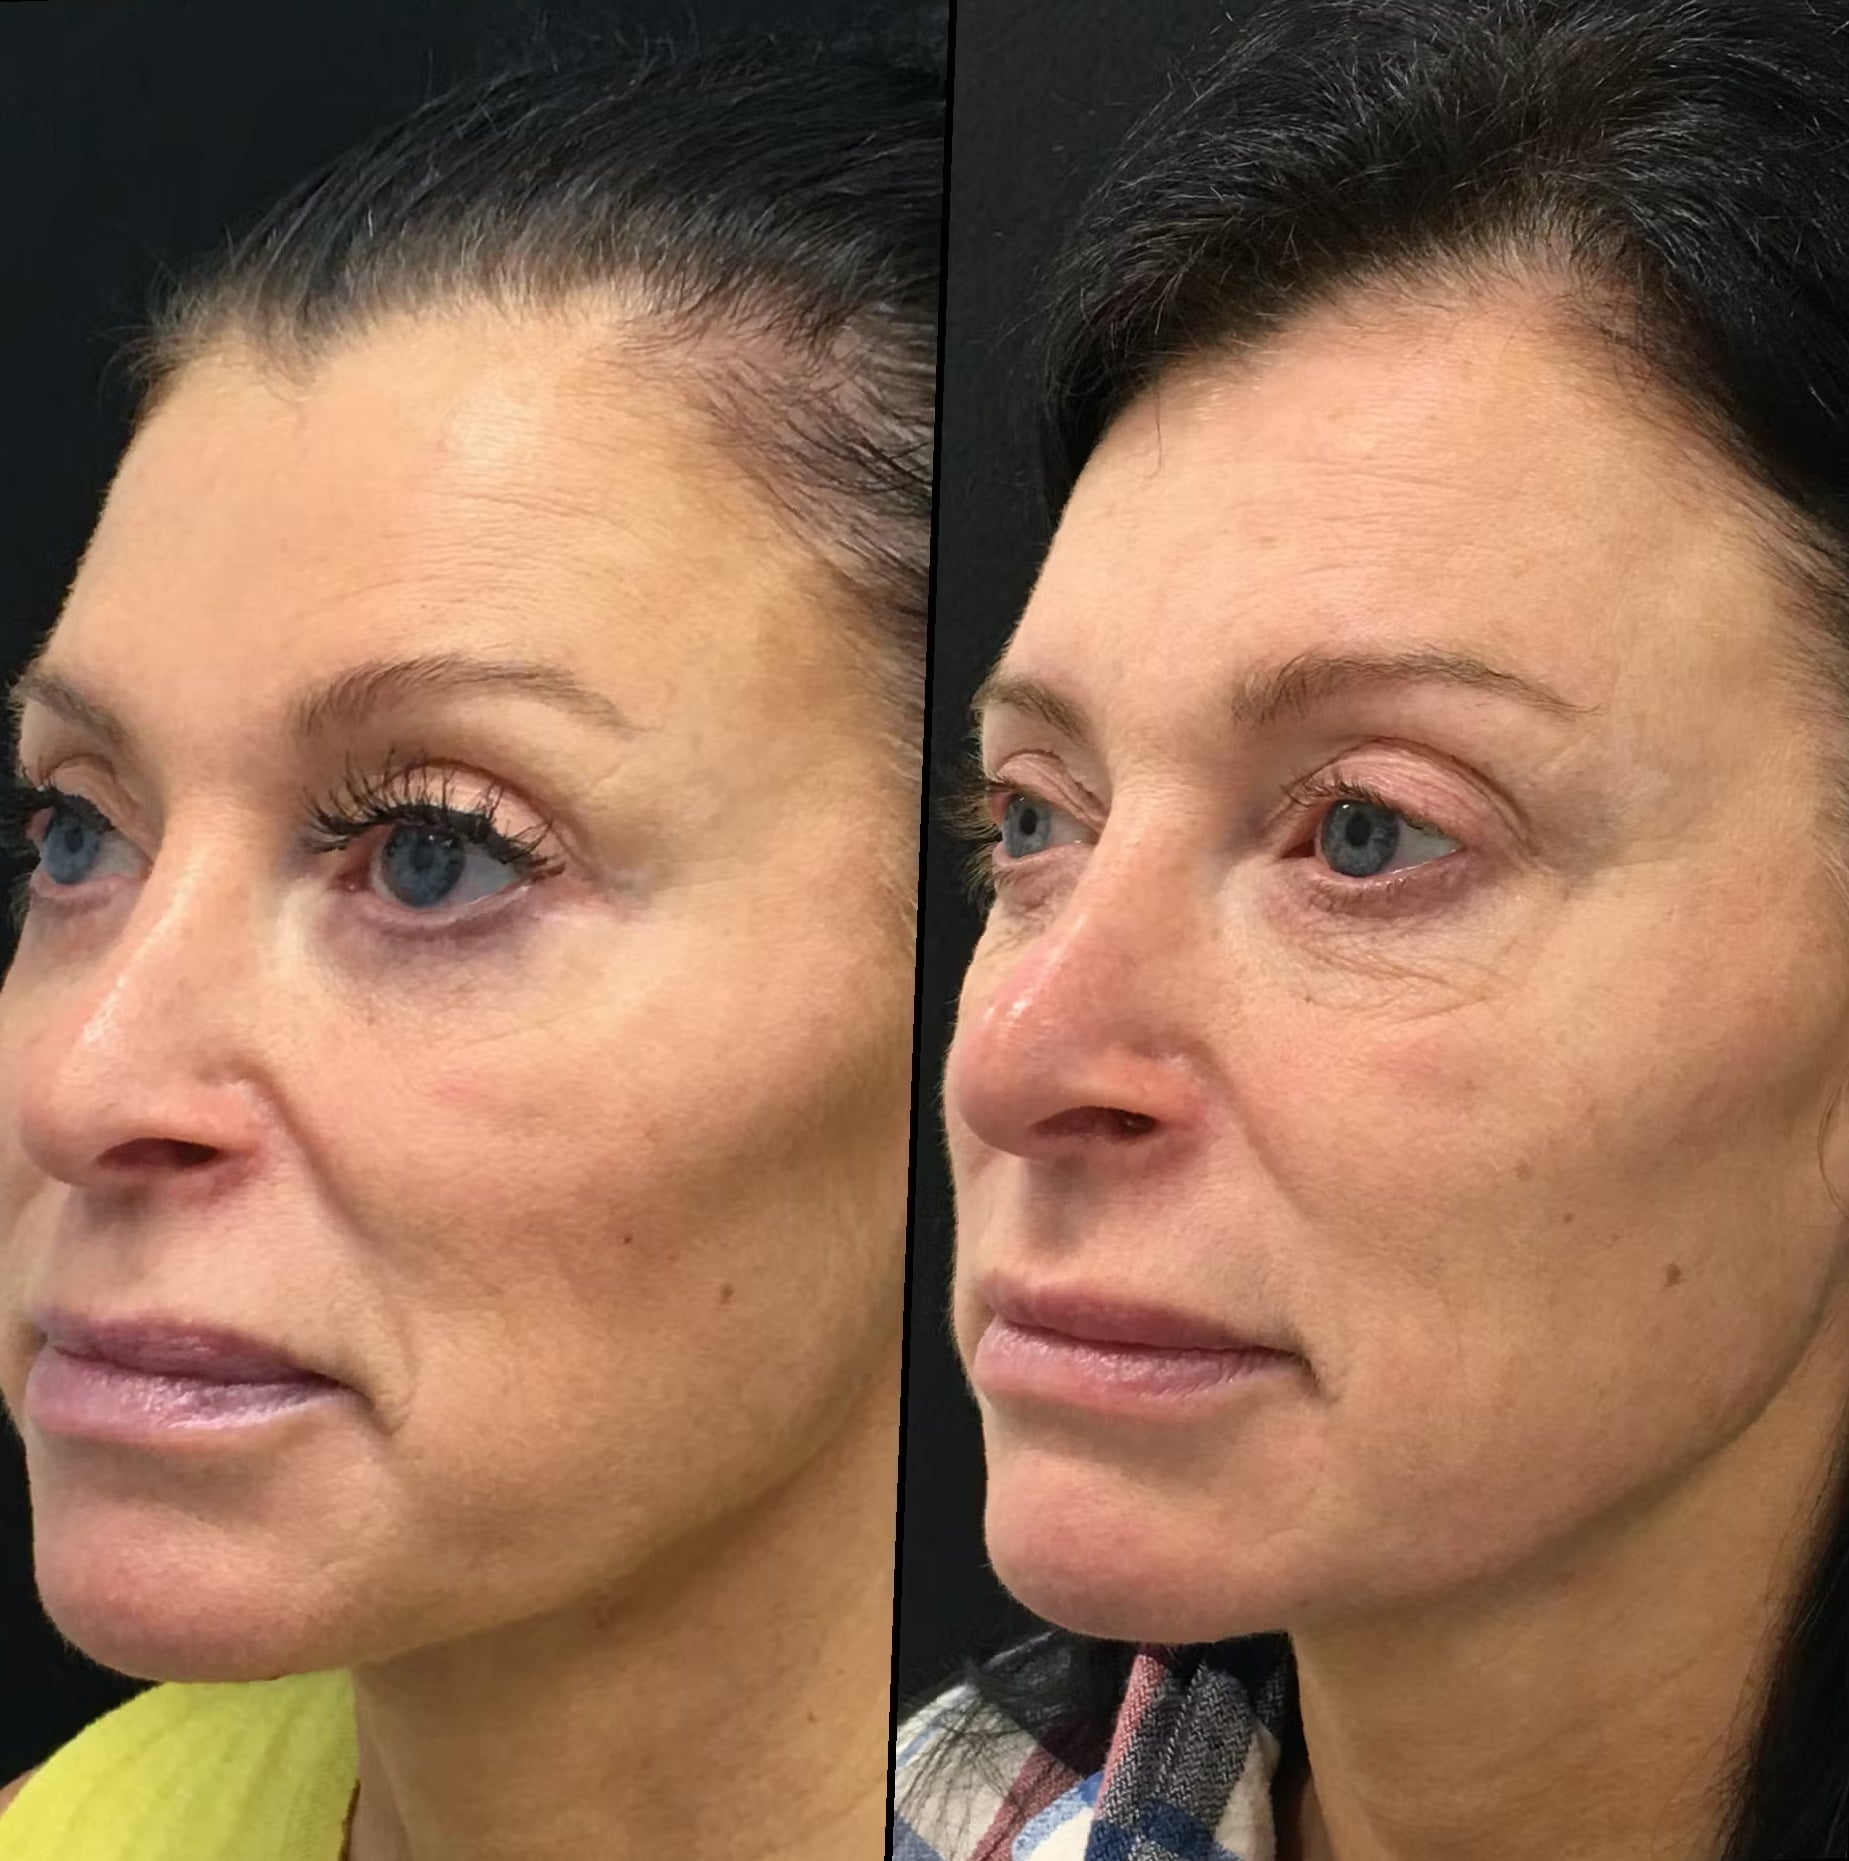 Blepharoplasty-Before-and-After-6